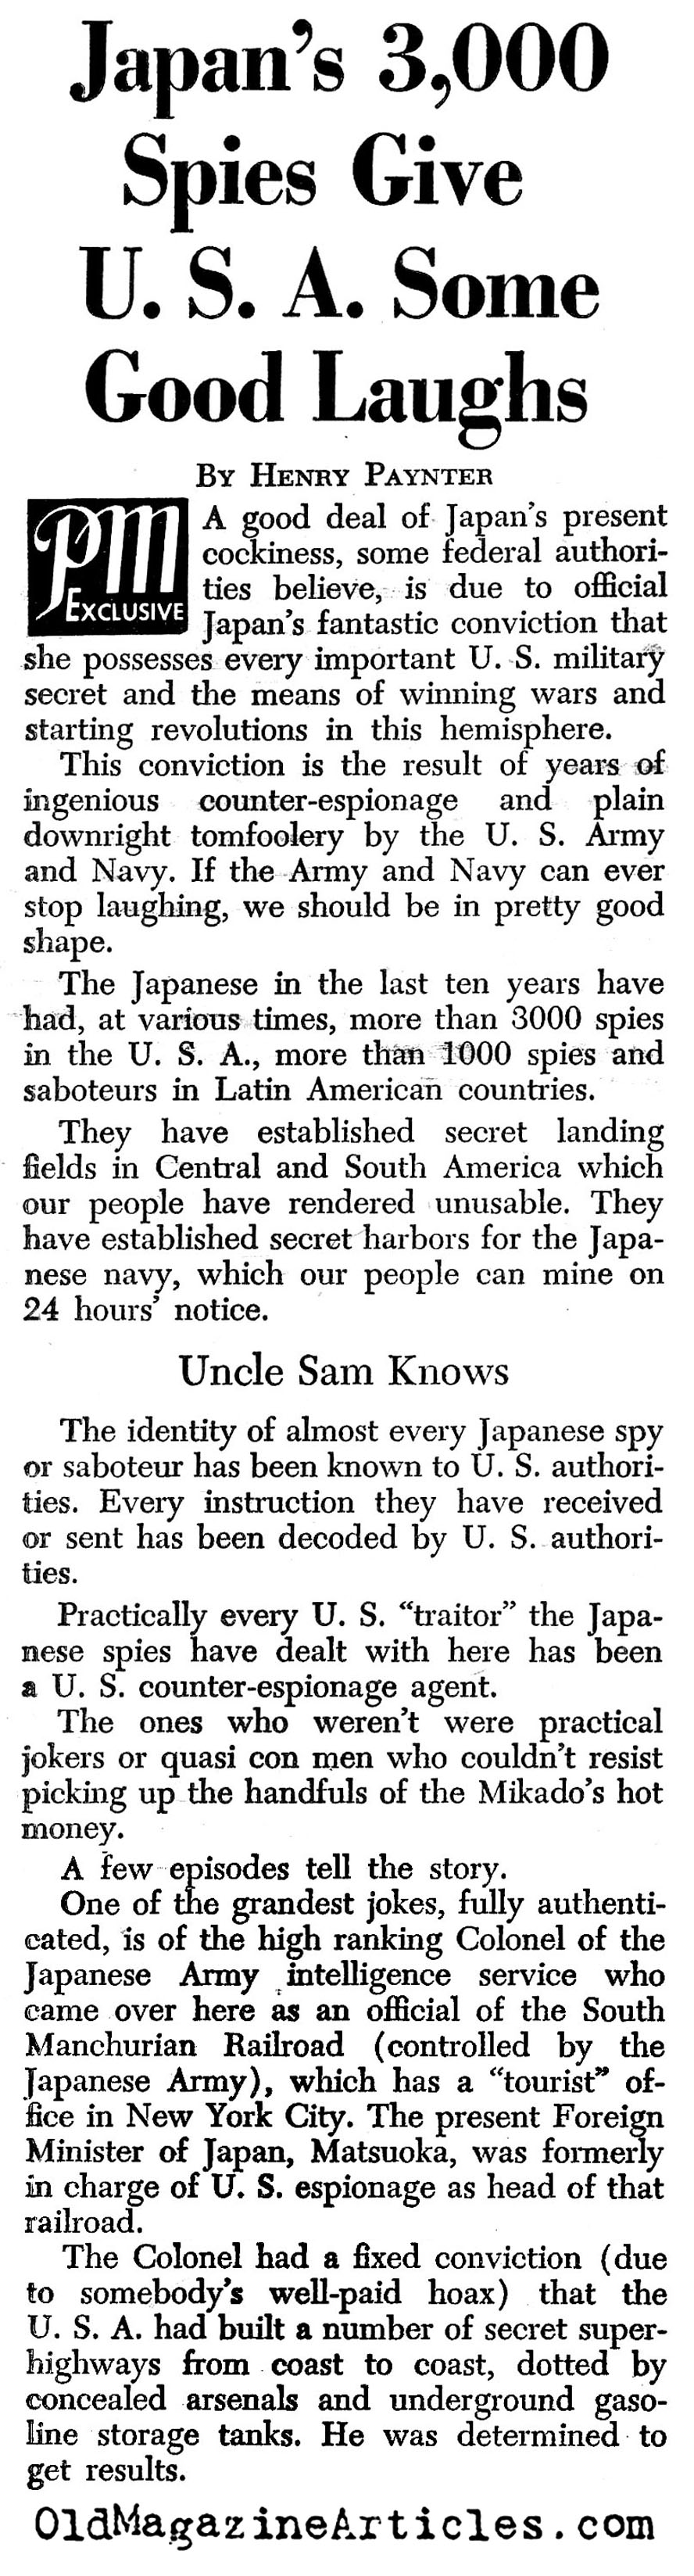 Japanese Spies and Their Many Troubles (<i>PM</i> Tabloid, 1940)